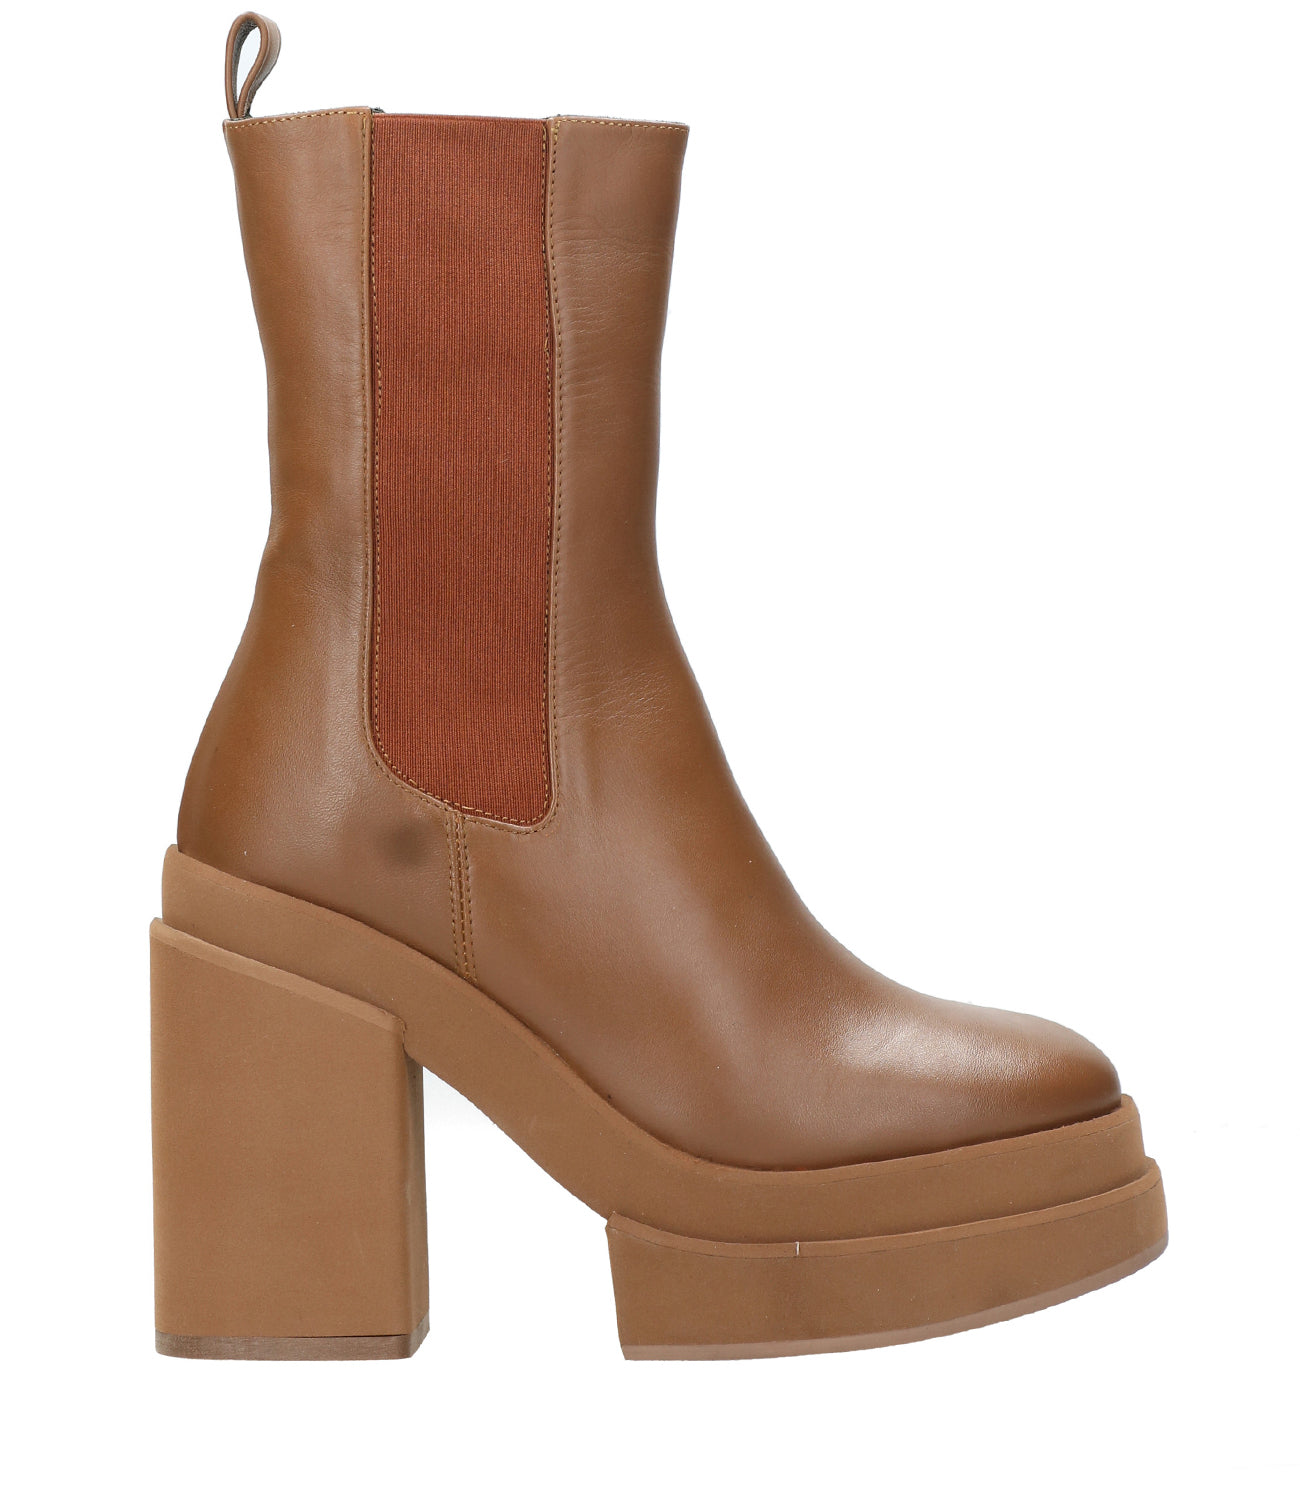 Paloma Barceló | Selene Cuoio ankle boot